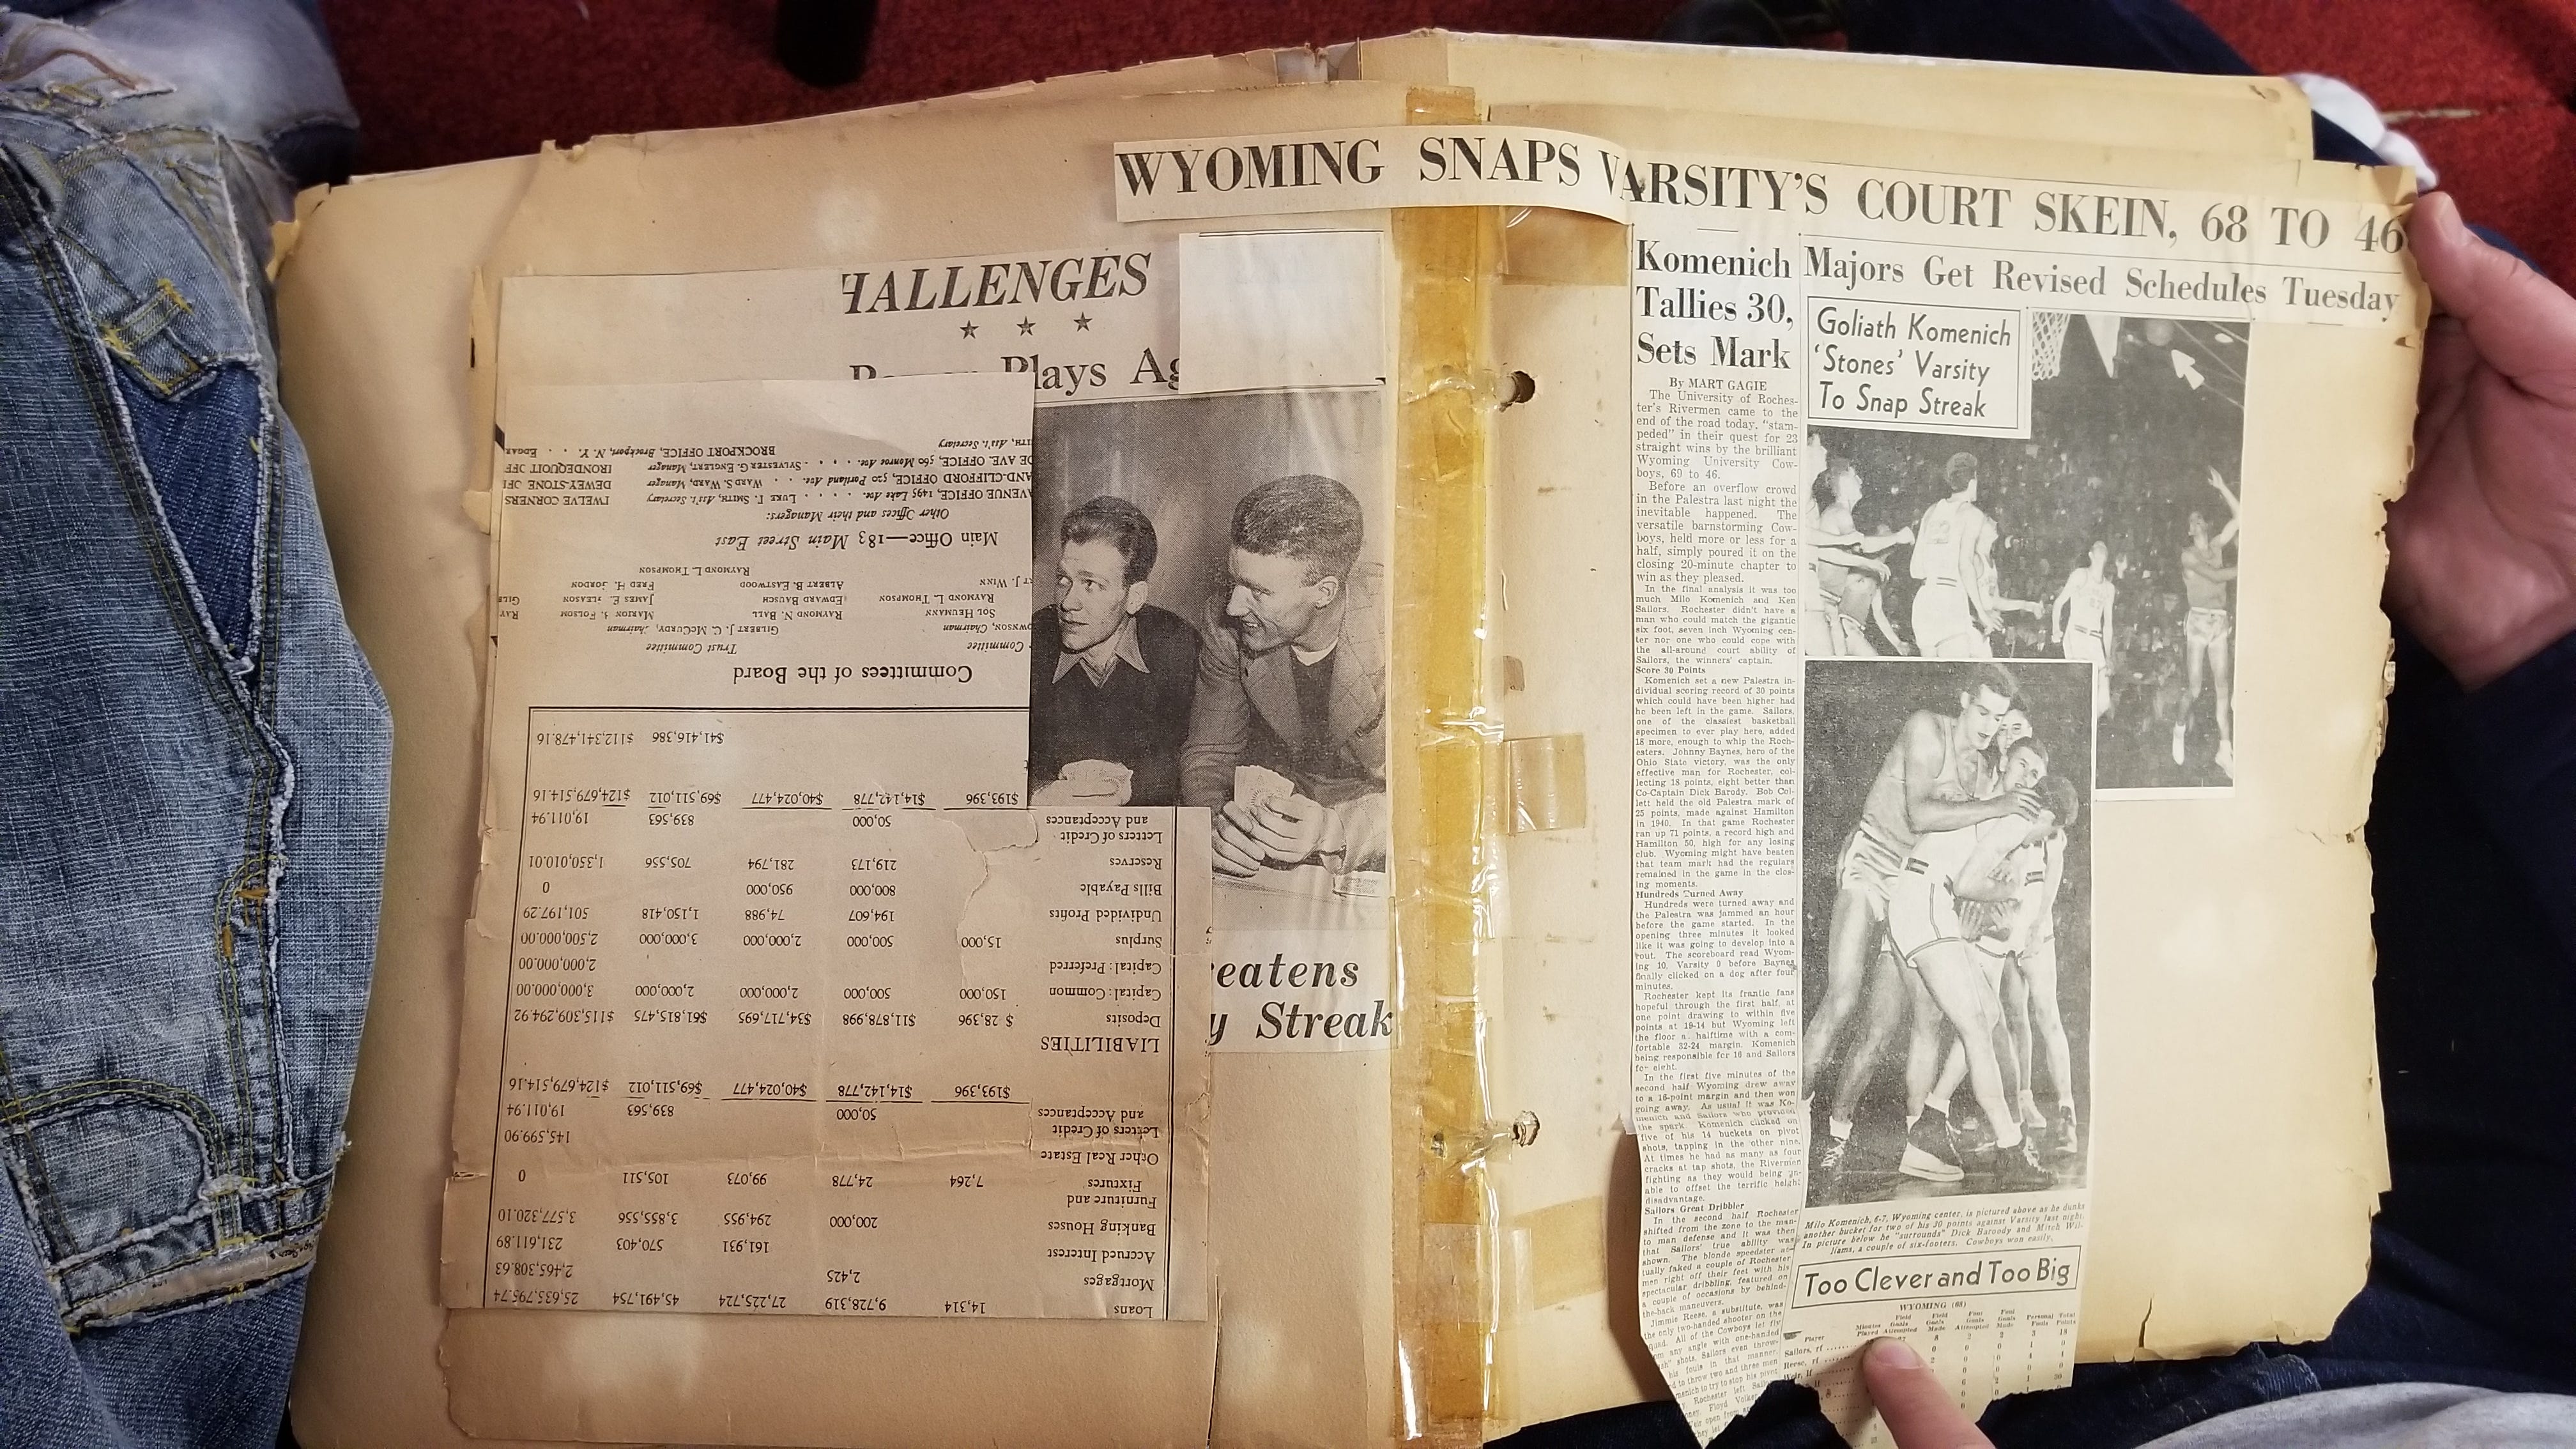 Newspaper clippings from coverage of the Rochester-Wyoming game in 1943. D&C on the left side, University of Rochester's student newspaper, The Campus, on the right.